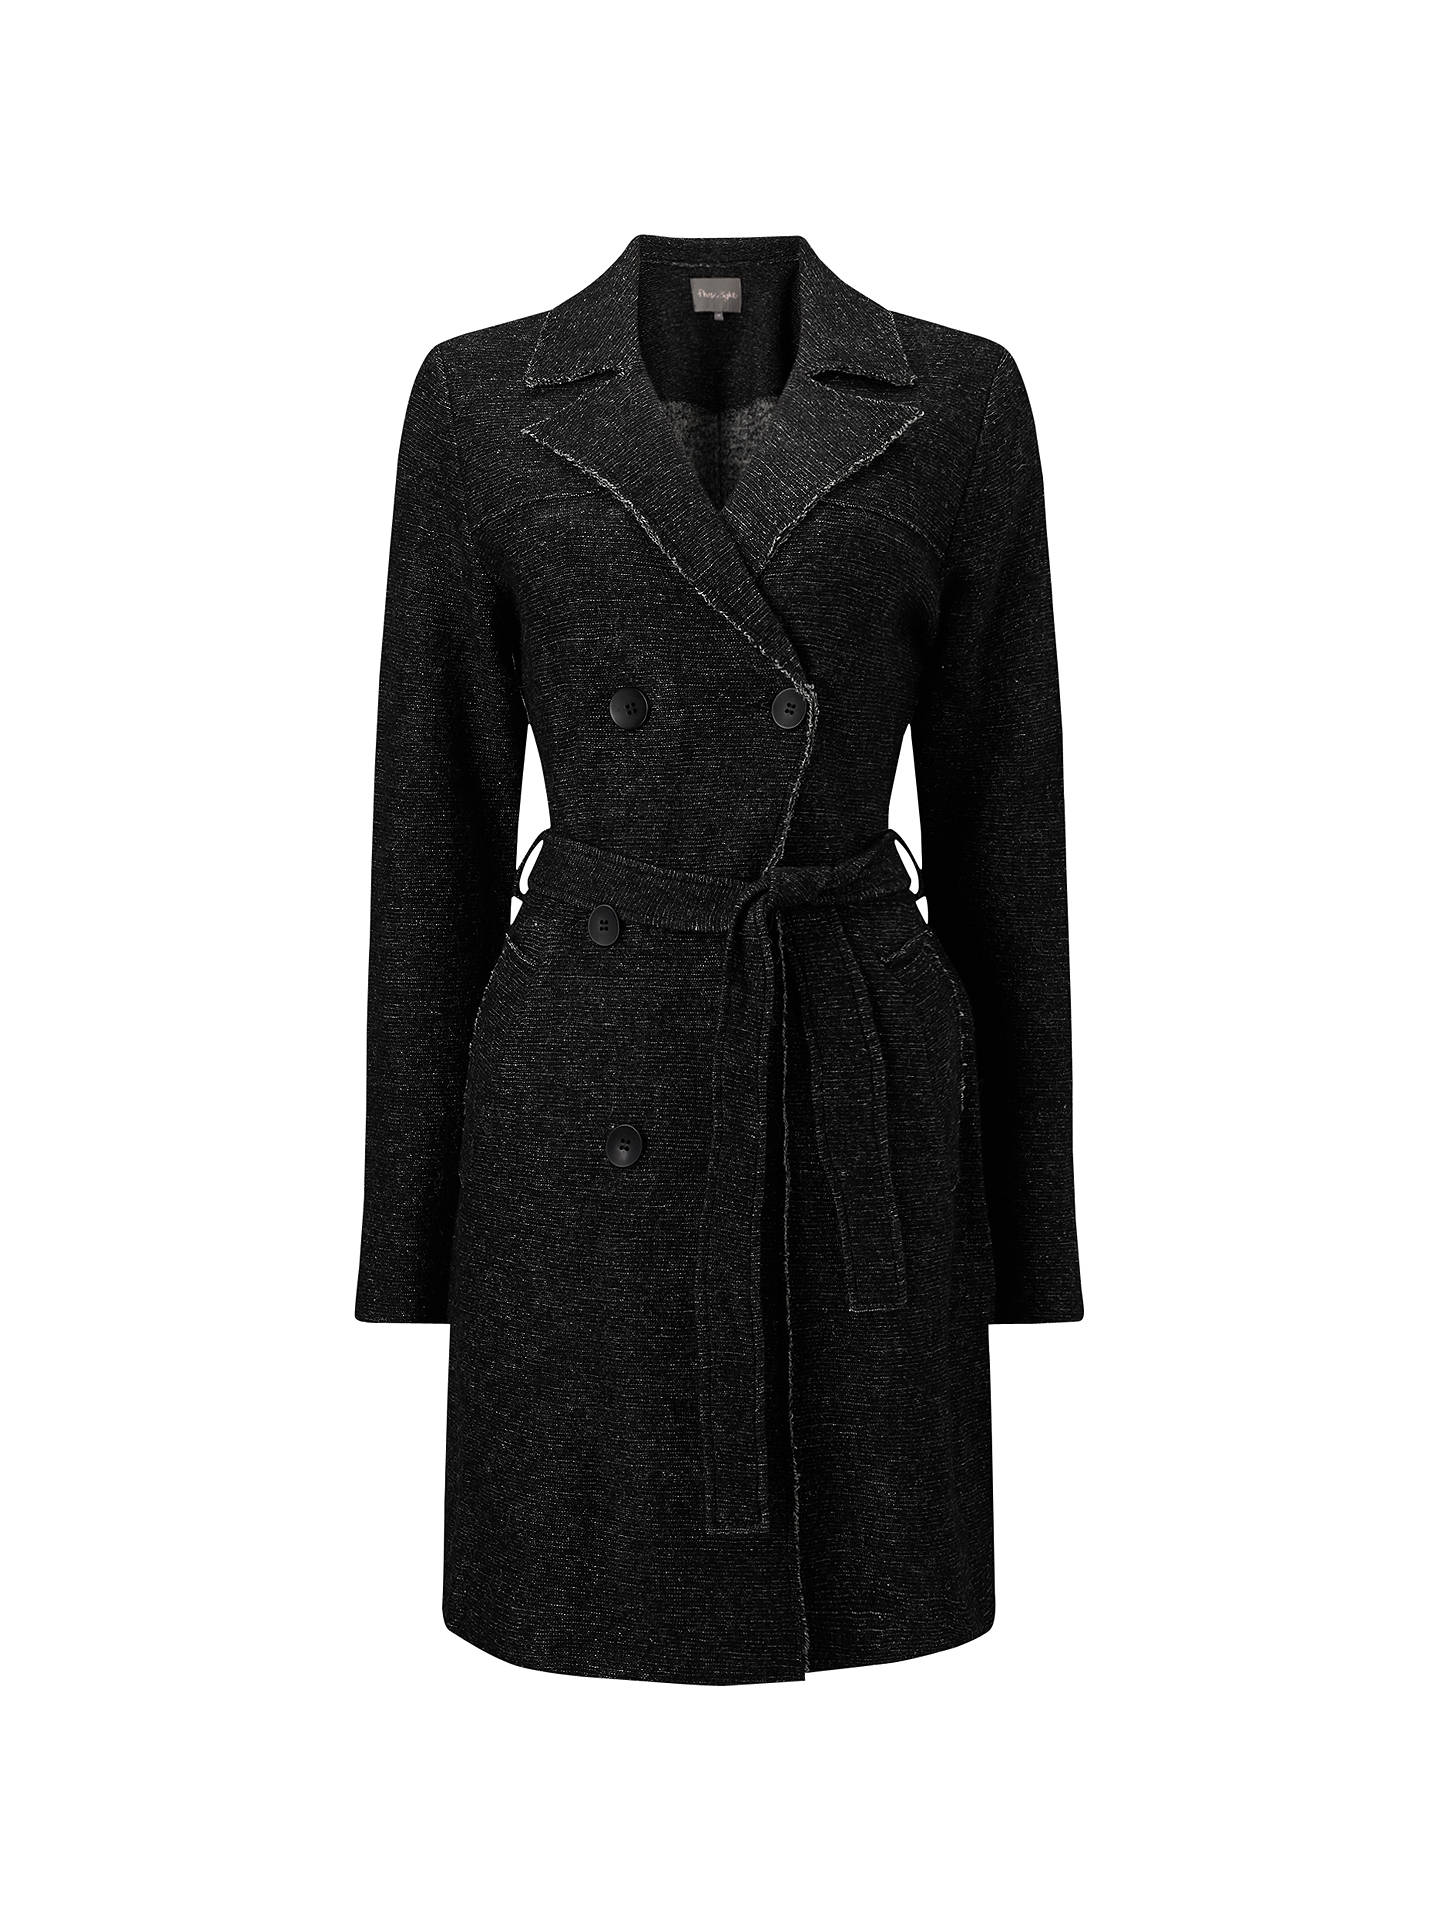 Phase Eight Trista Boiled Wool Trench Coat, Charcoal at John Lewis ...